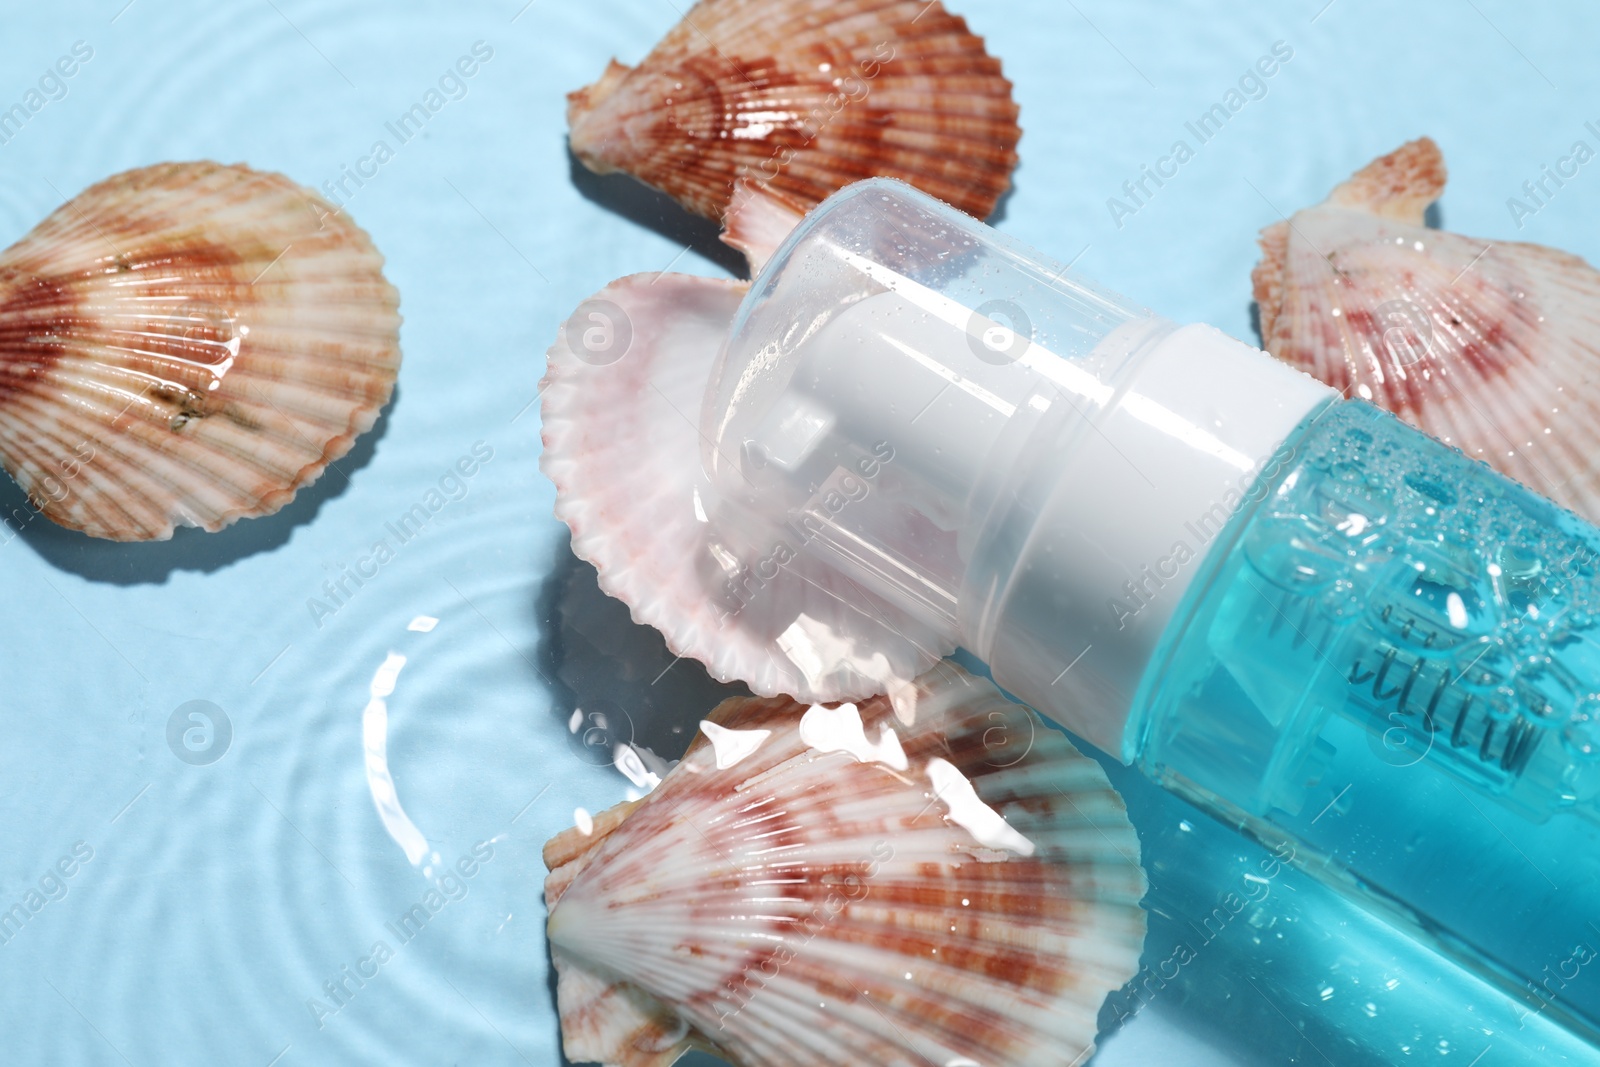 Photo of Bottle of face cleansing product and seashells in water against light blue background, closeup